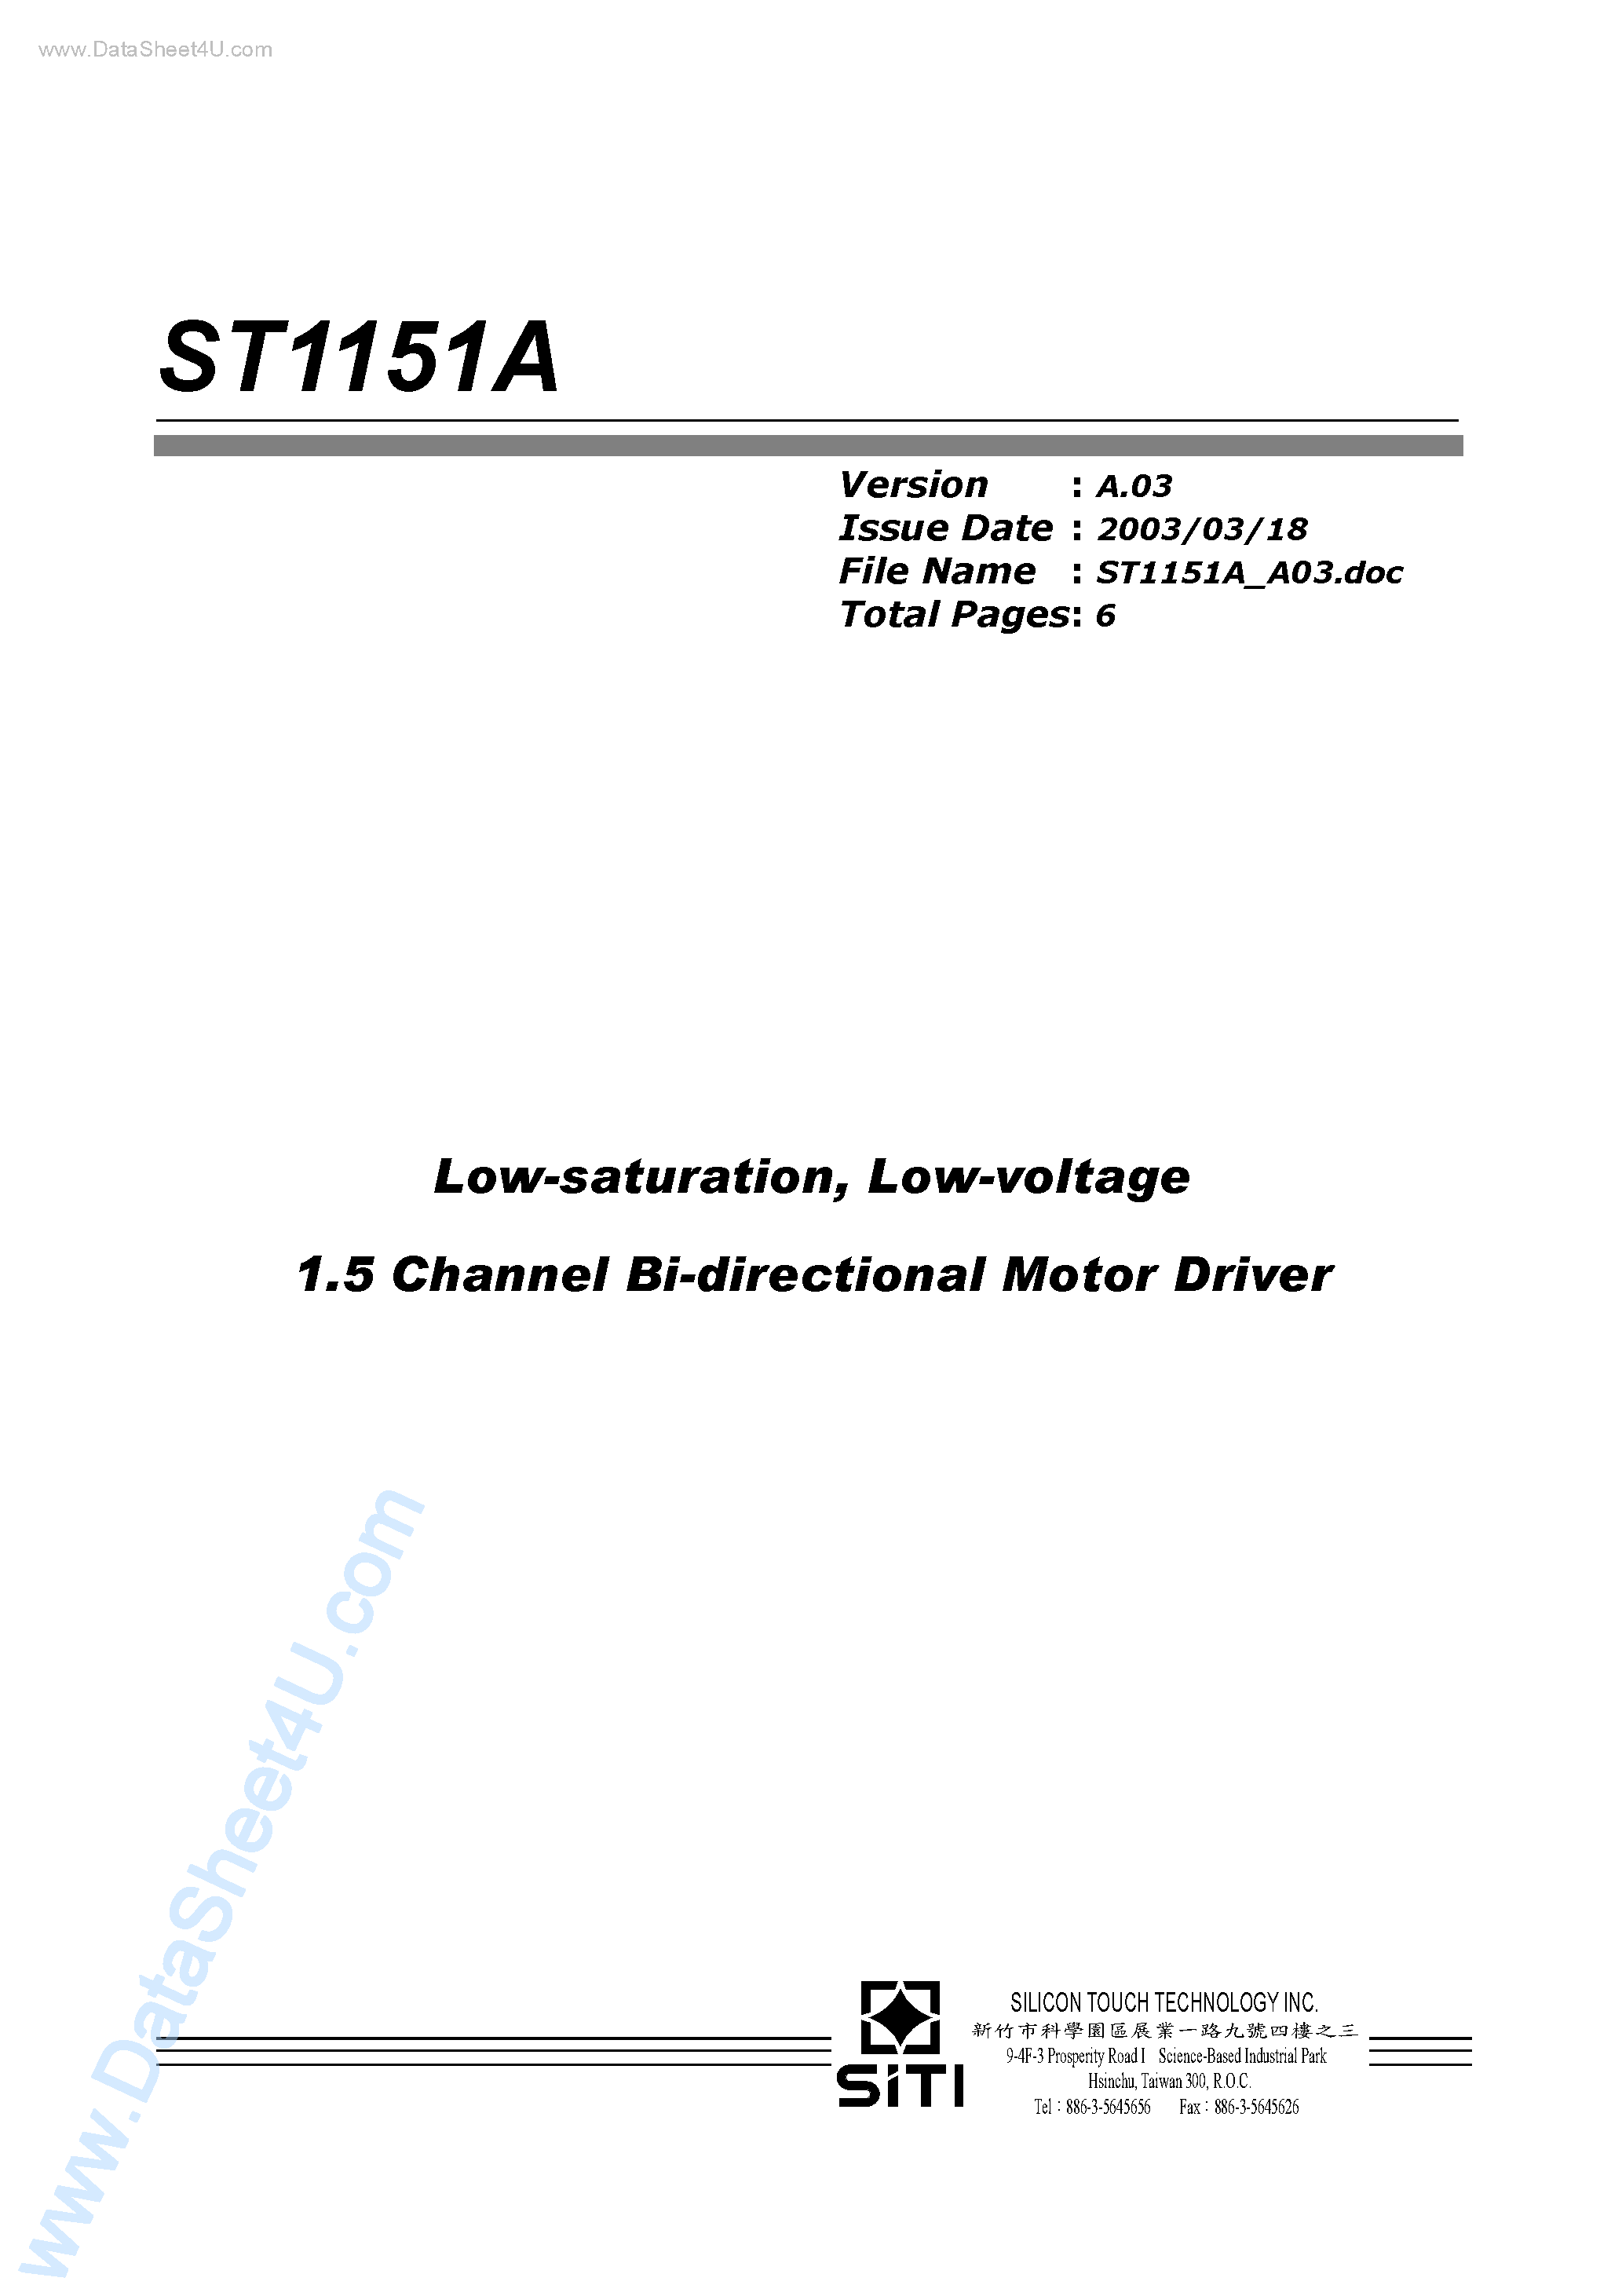 Datasheet ST1151A - Low-voltage 1.5 Channel Bi-directional Motor Driver page 1